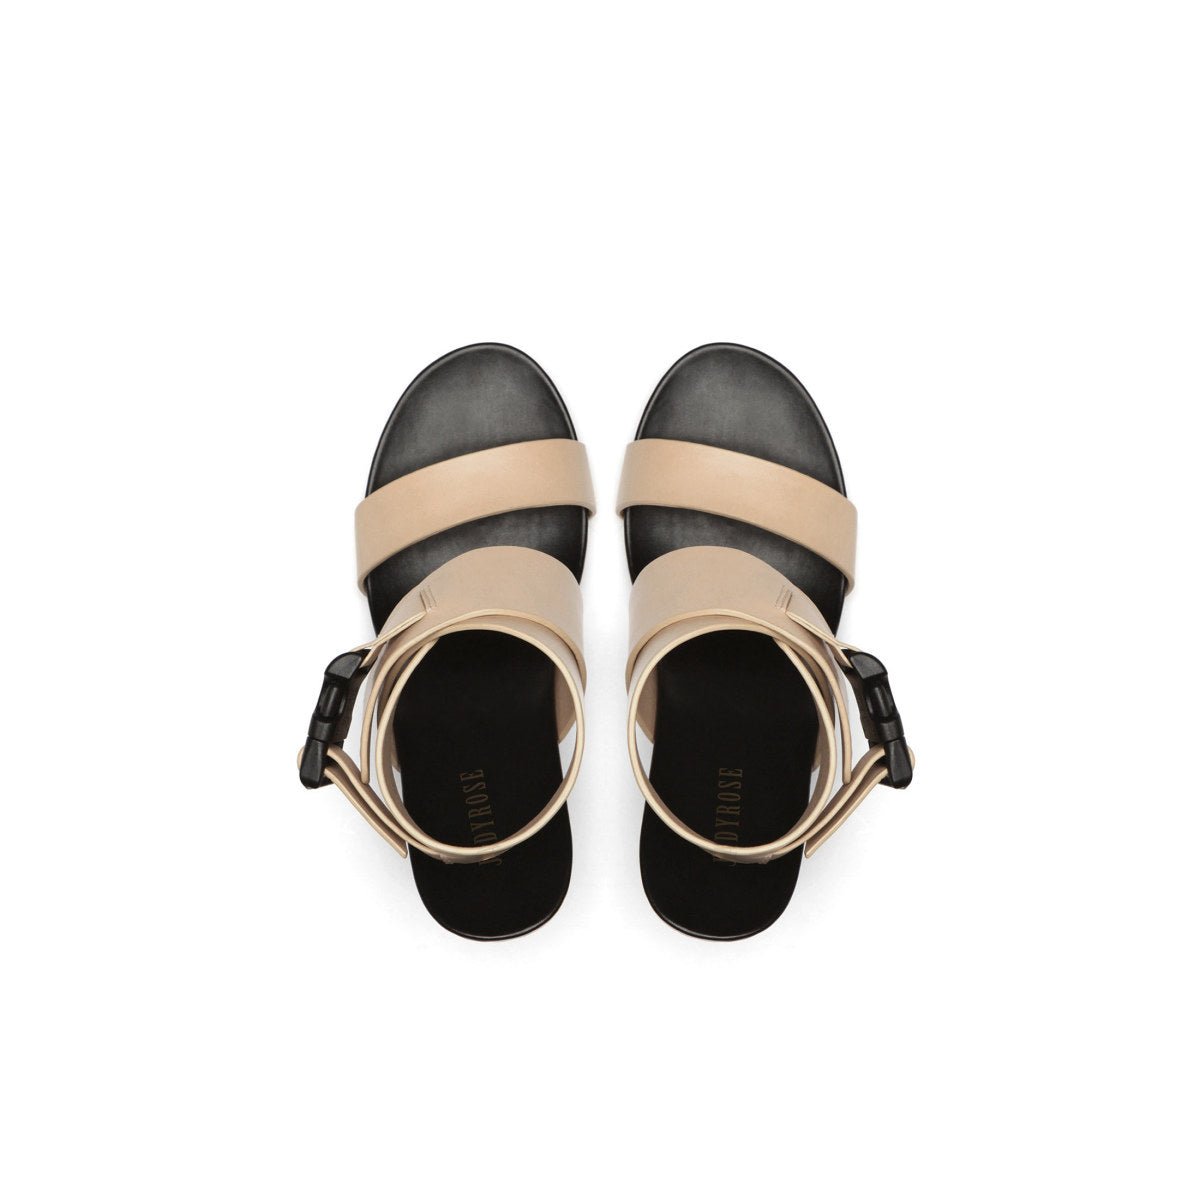 Release Buckle Chair-Heel Leather Apricot Sandals - 0cm